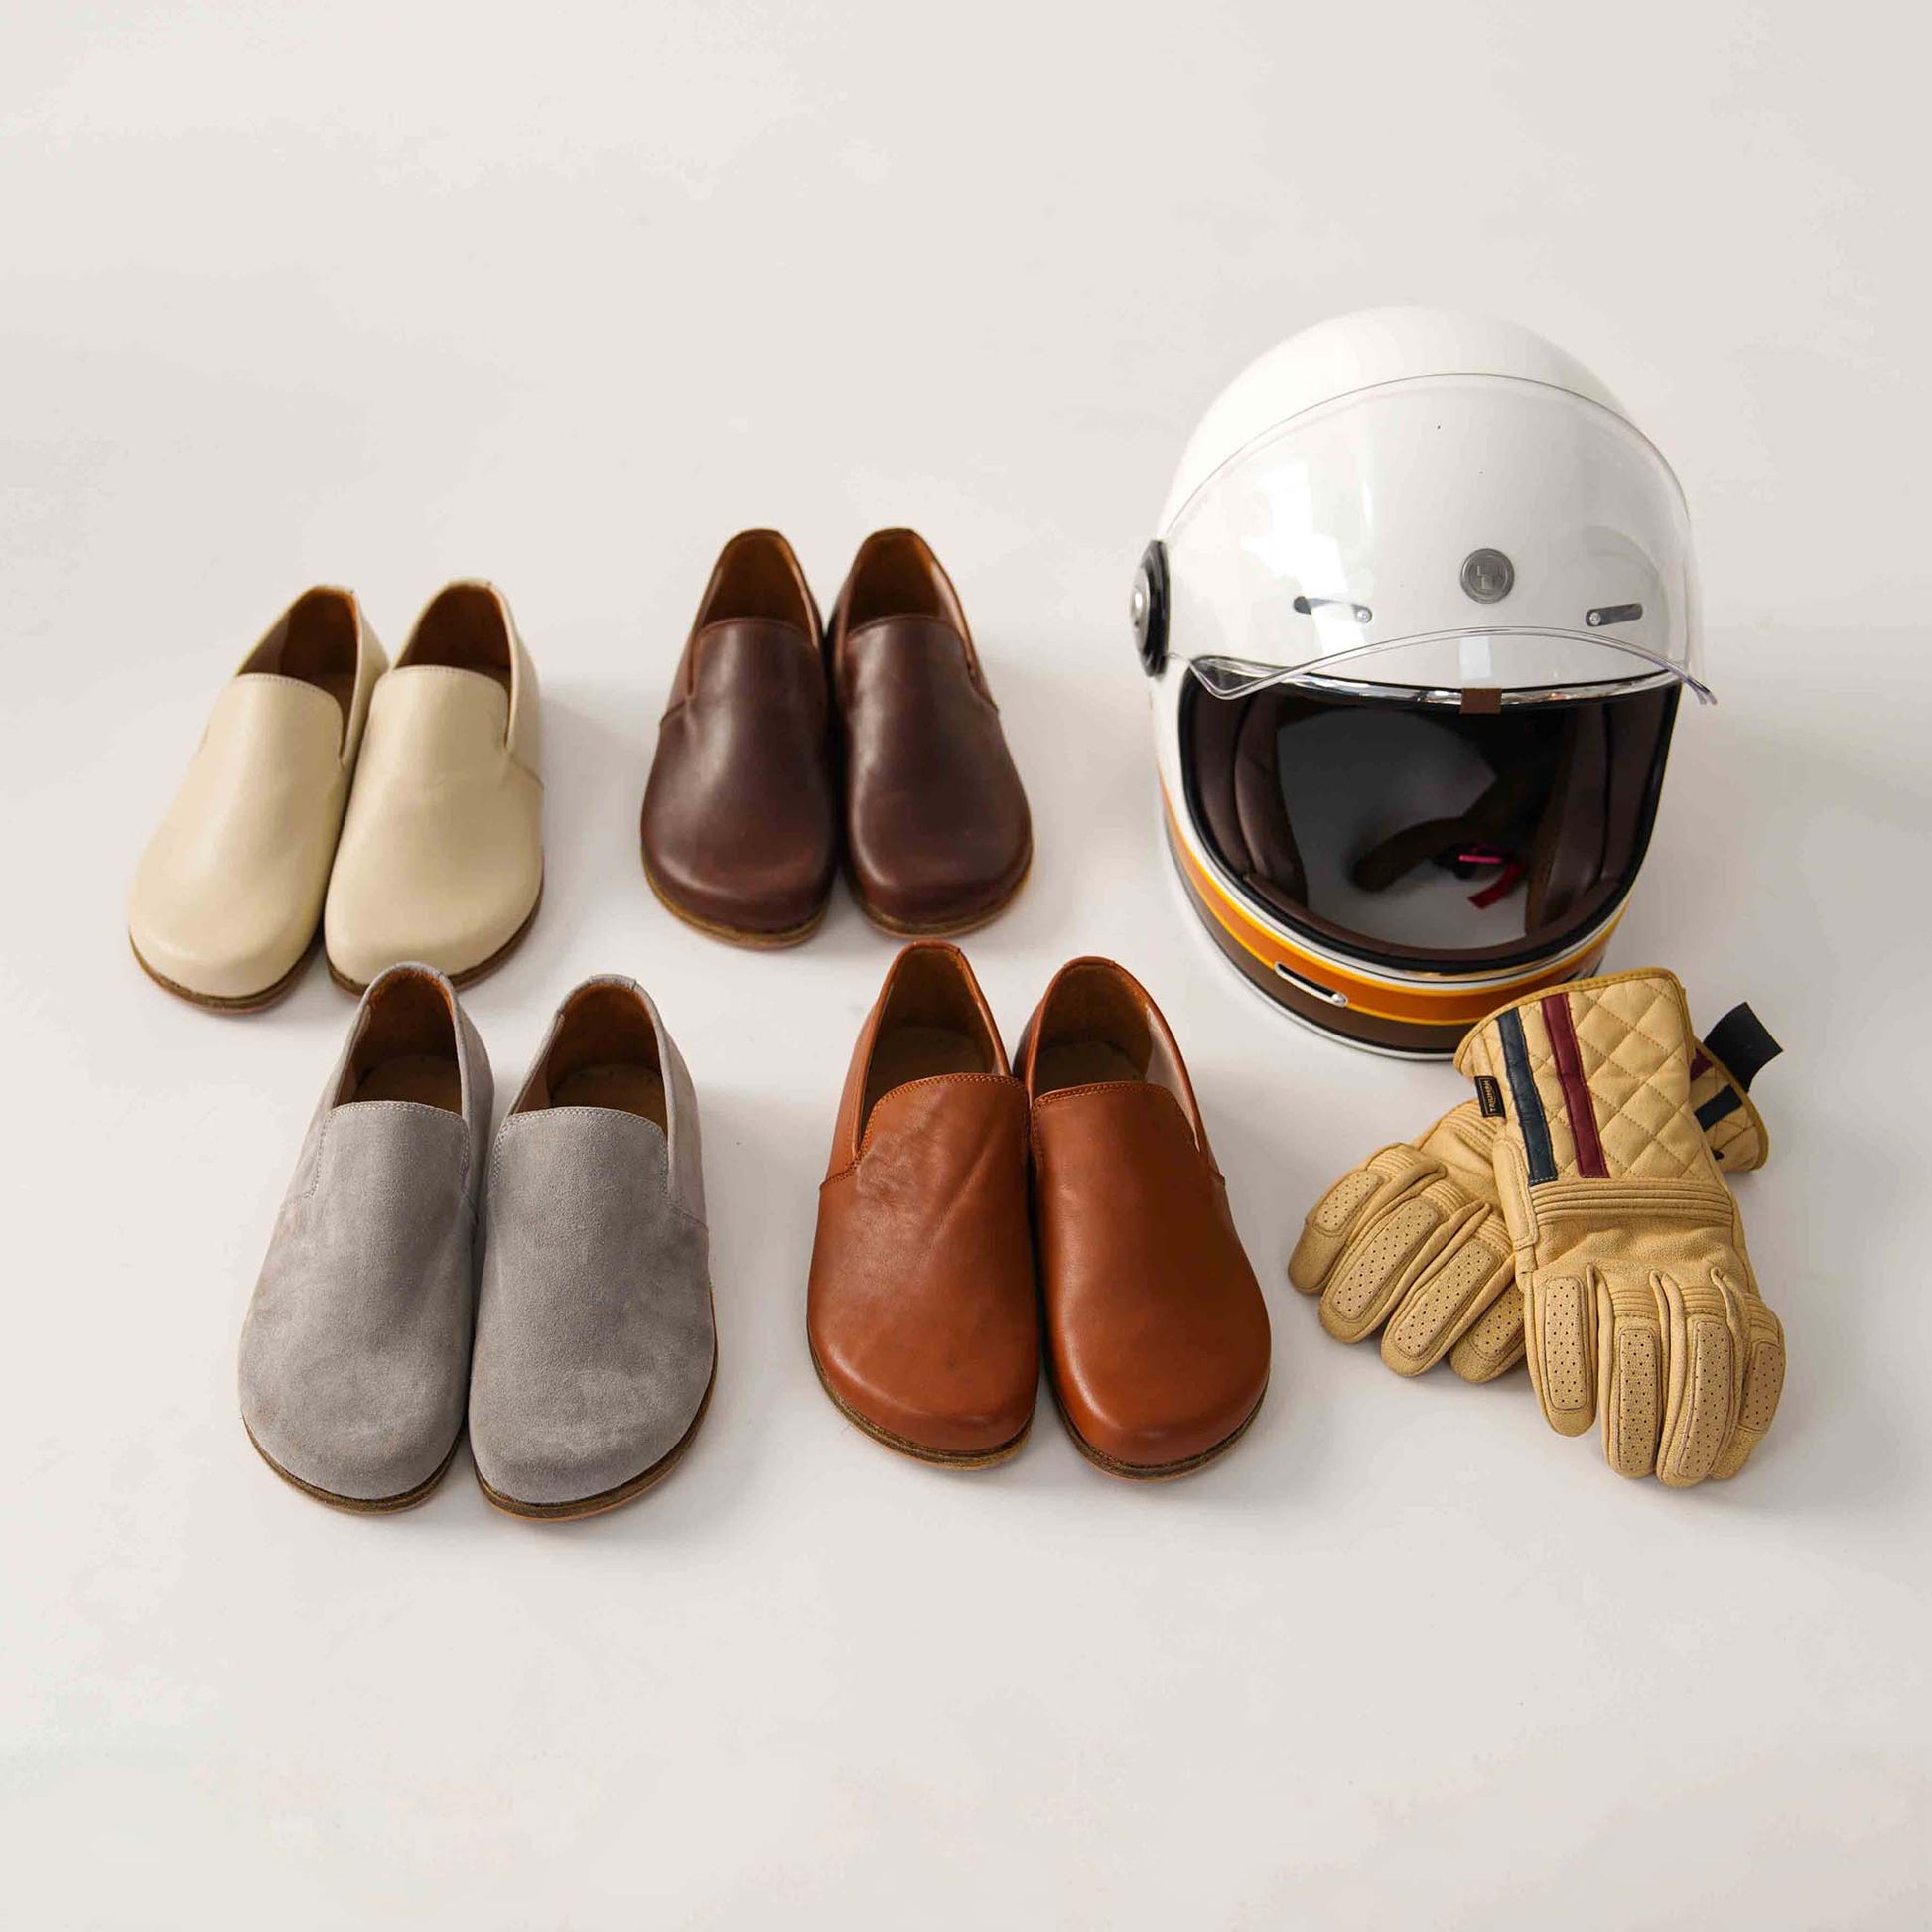 Collection of Aeolia leather barefoot loafers in various colors, displayed with a helmet and gloves.